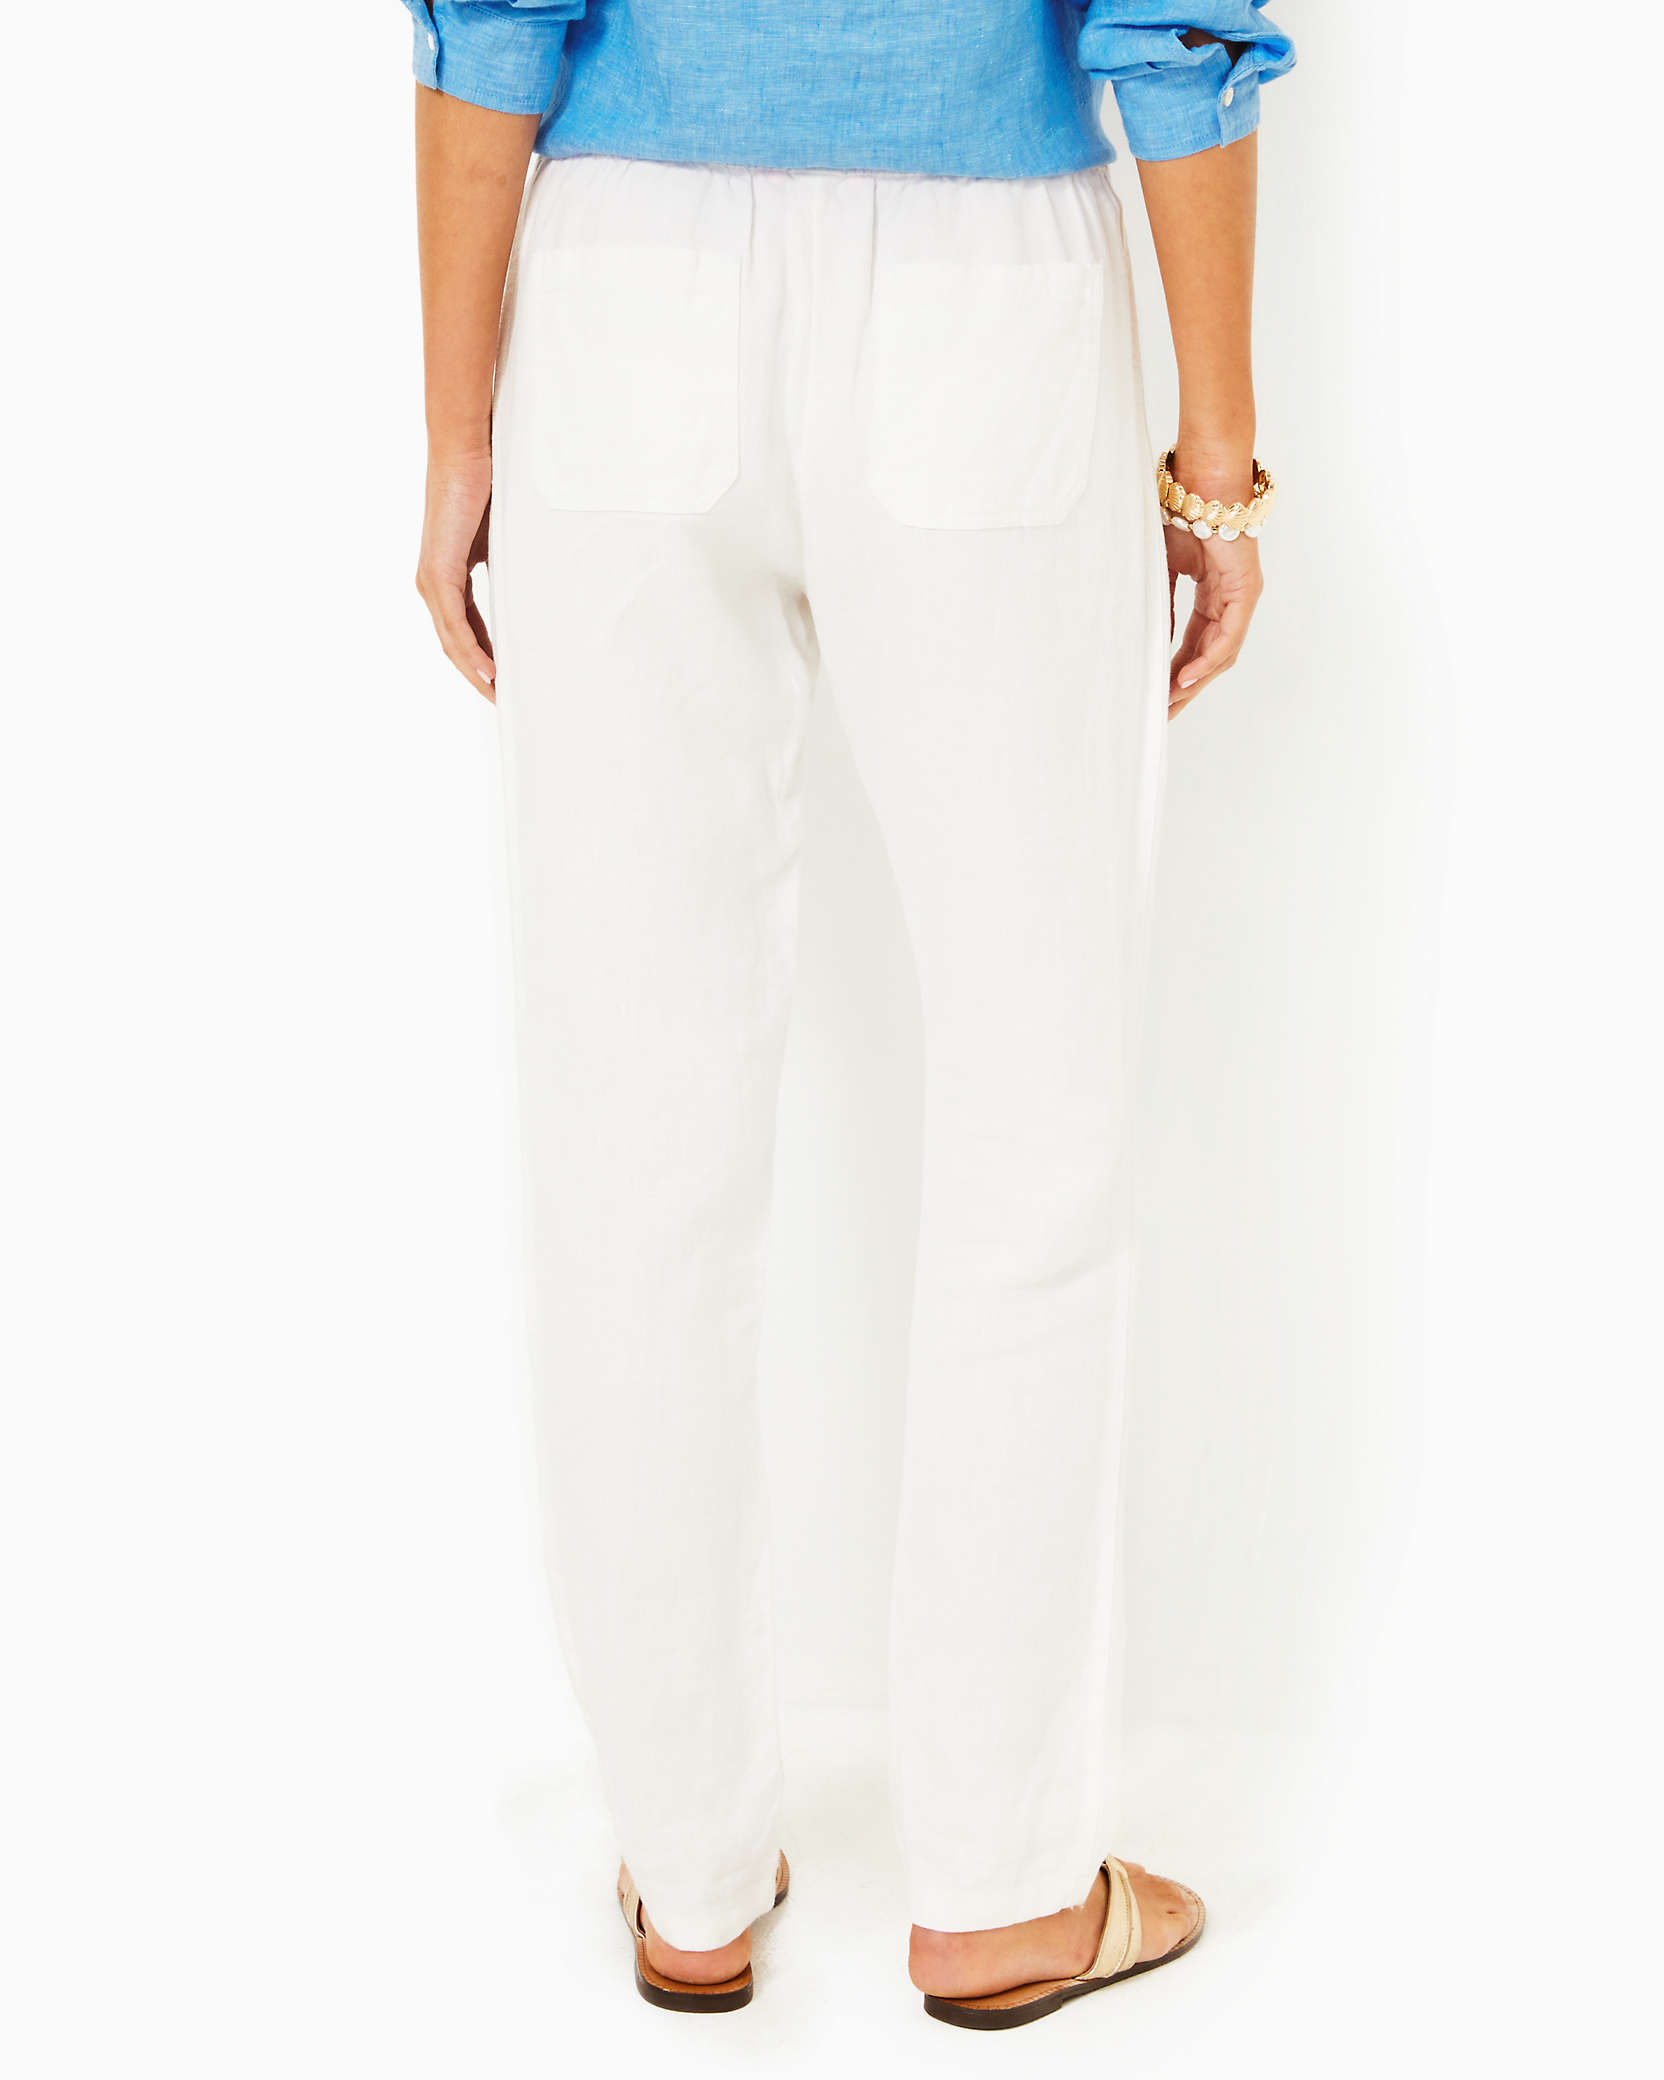 Shop Lilly Pulitzer 31" Taron Mid Rise Linen Pant In Resort White